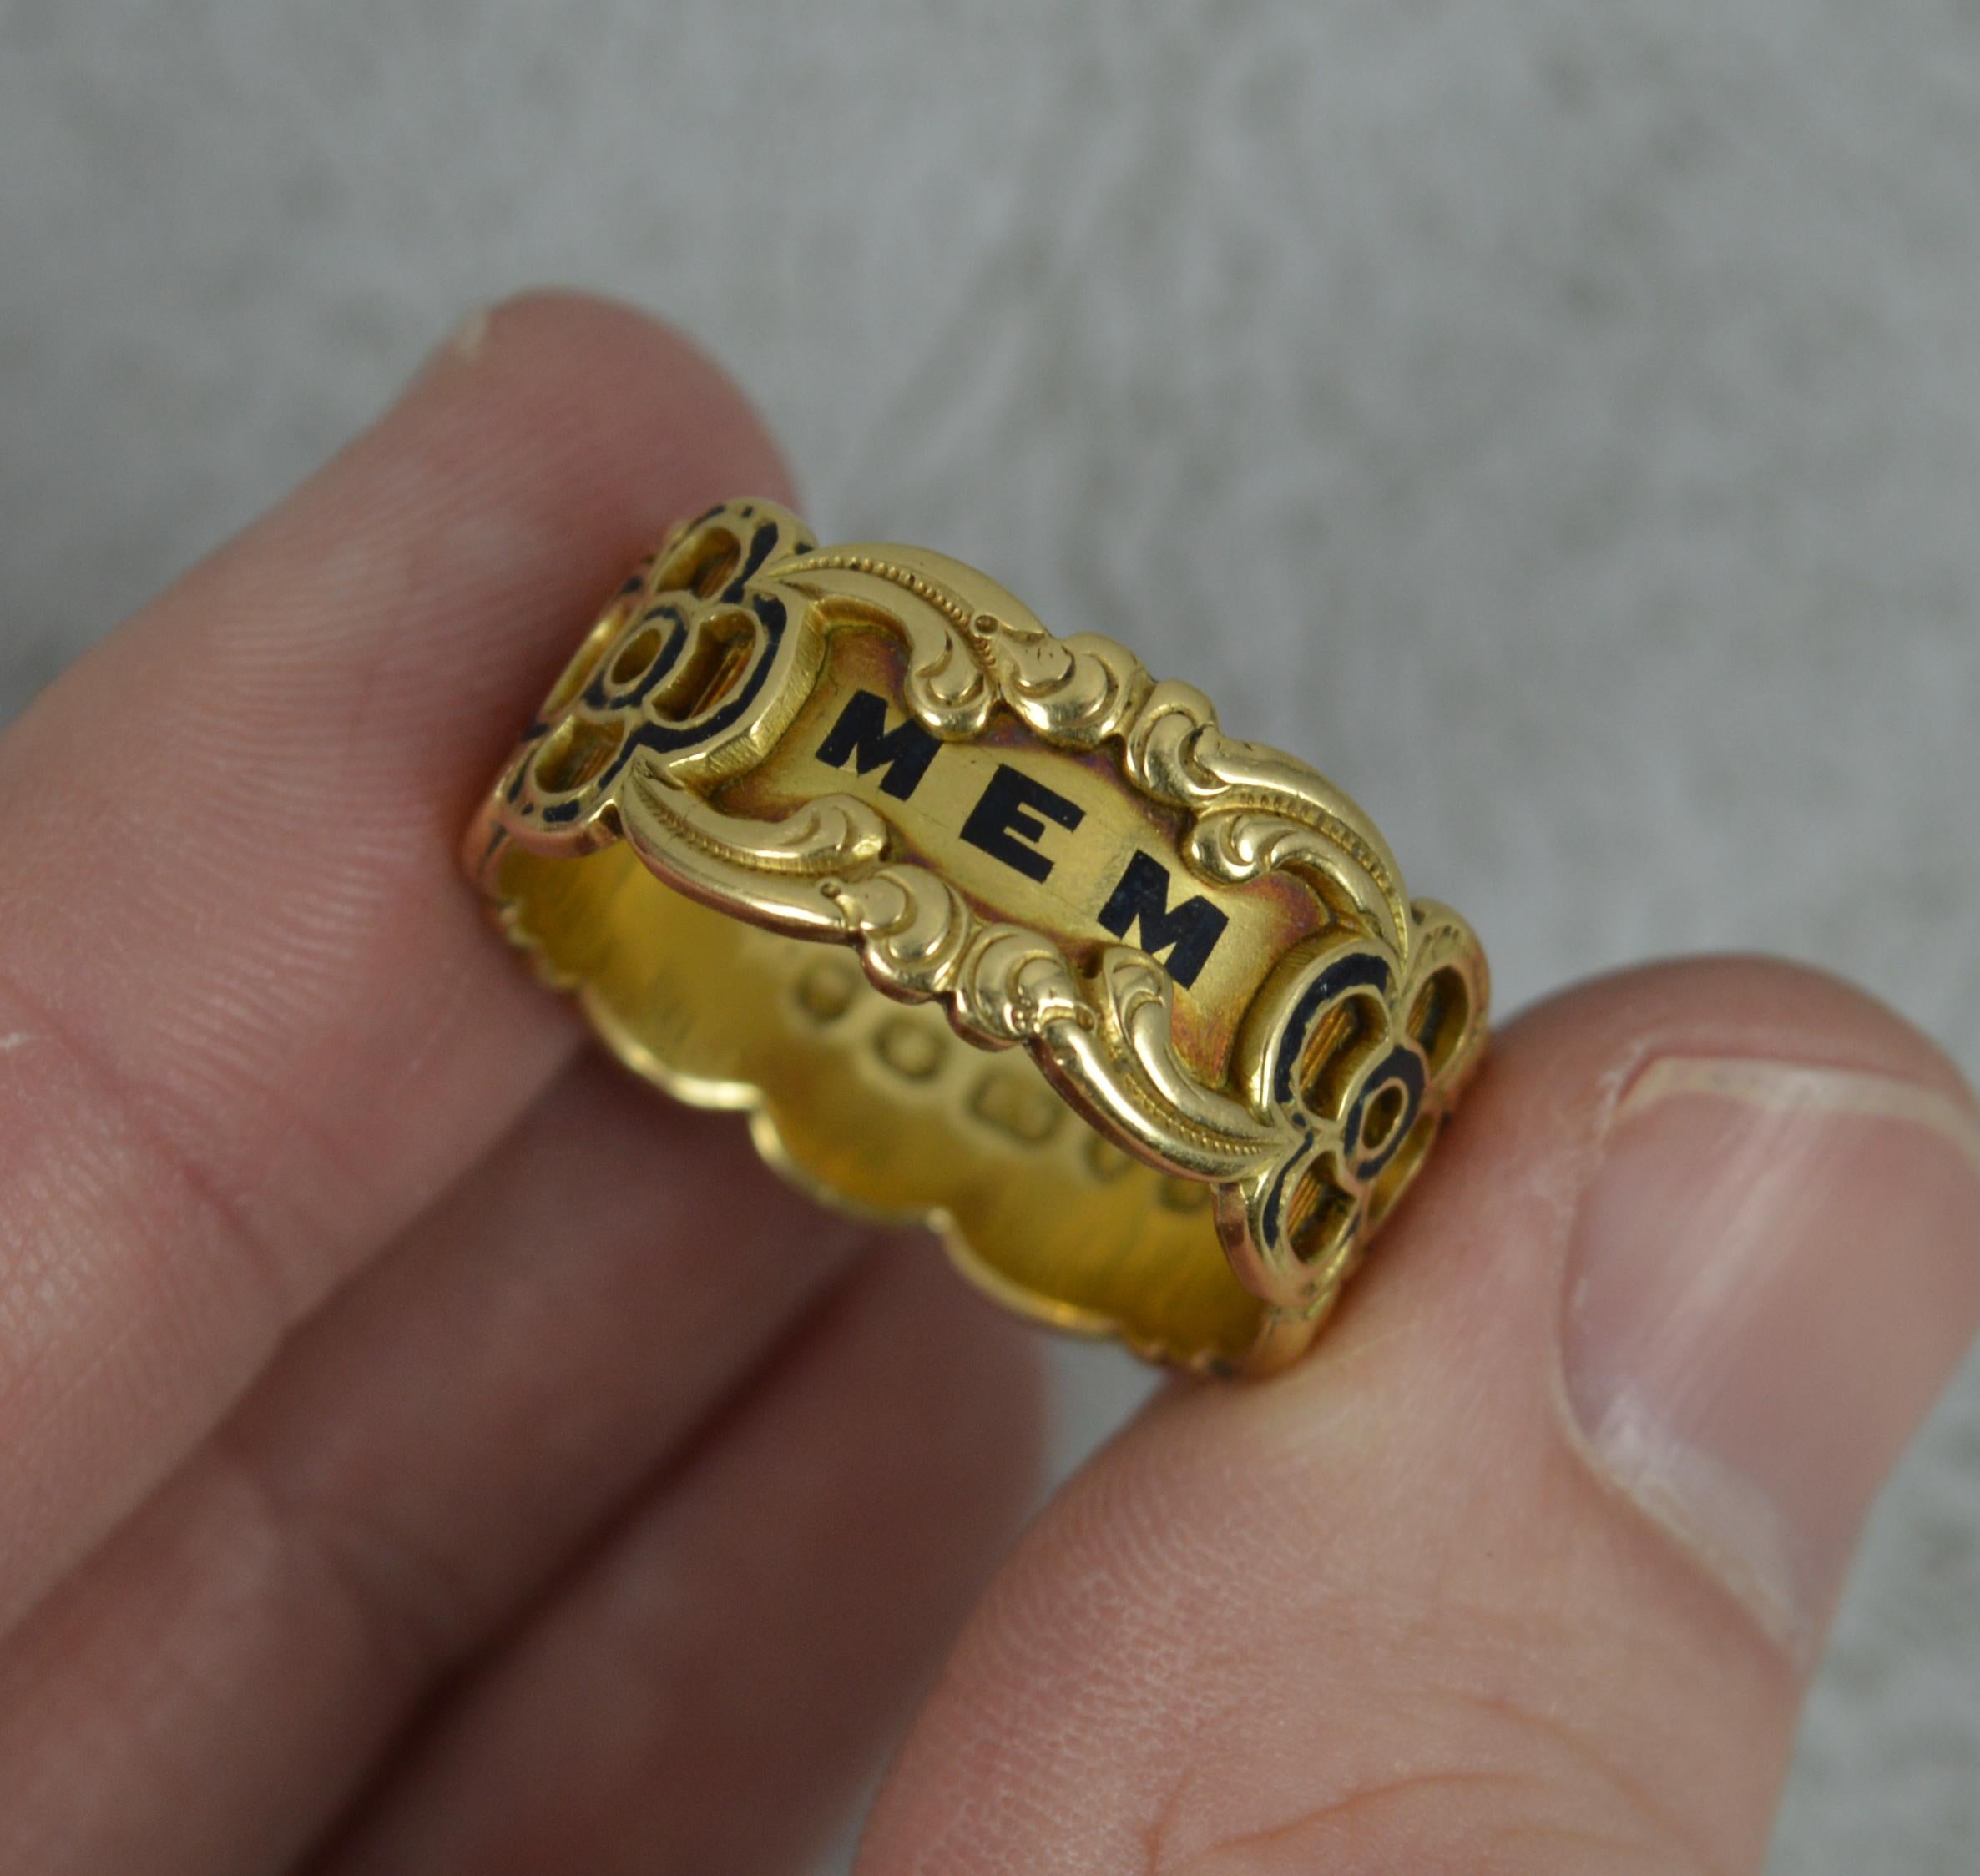 1842 Victorian 18 Carat Gold Enamel In Memory of Mourning Band Ring For Sale 5